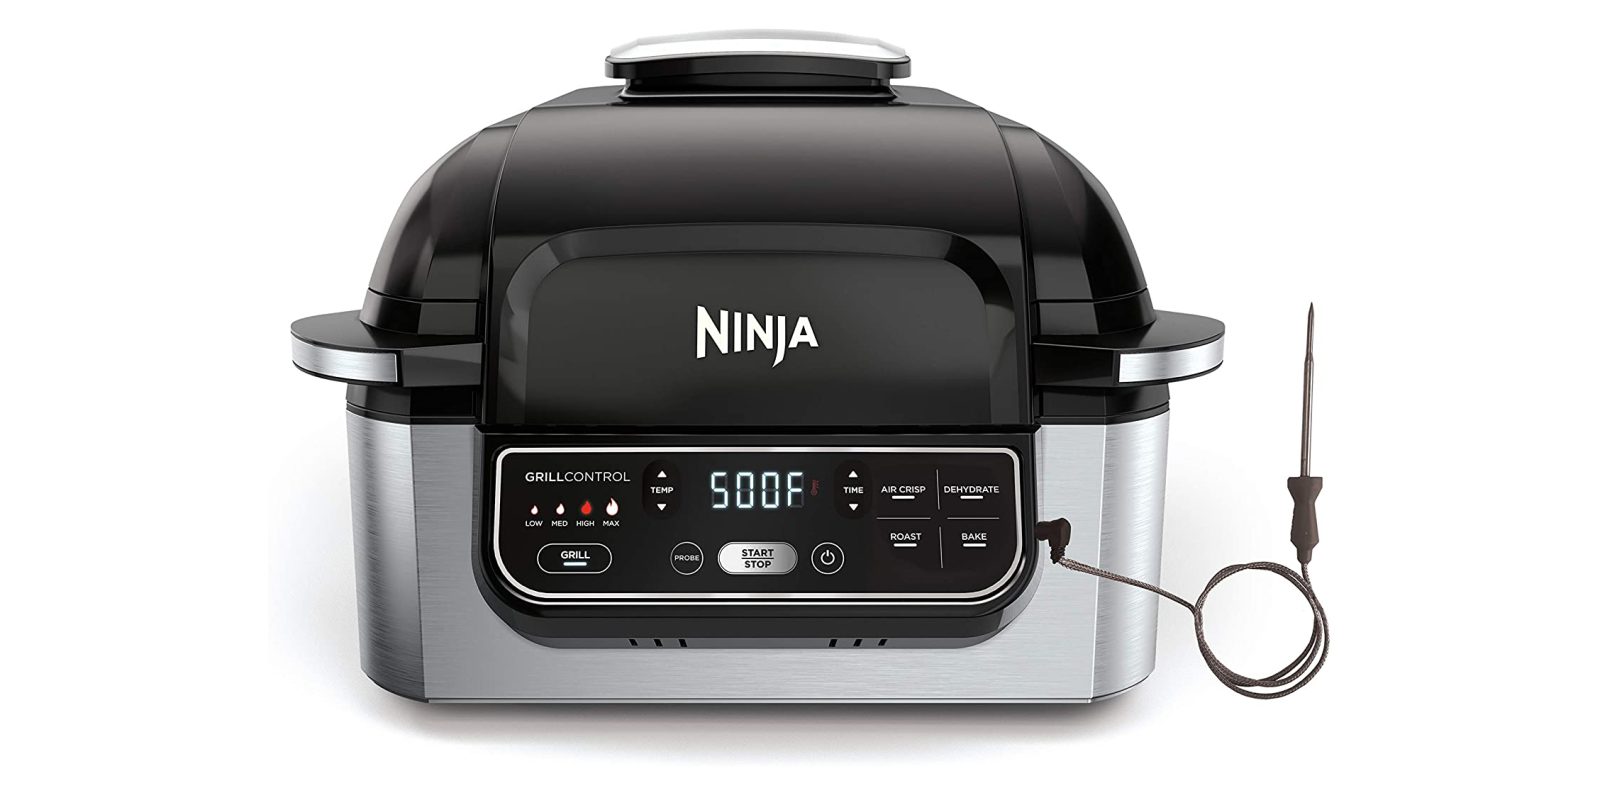 Today only, the Ninja Foodi Pro 5in1 Air Fryer hits Amazon low at